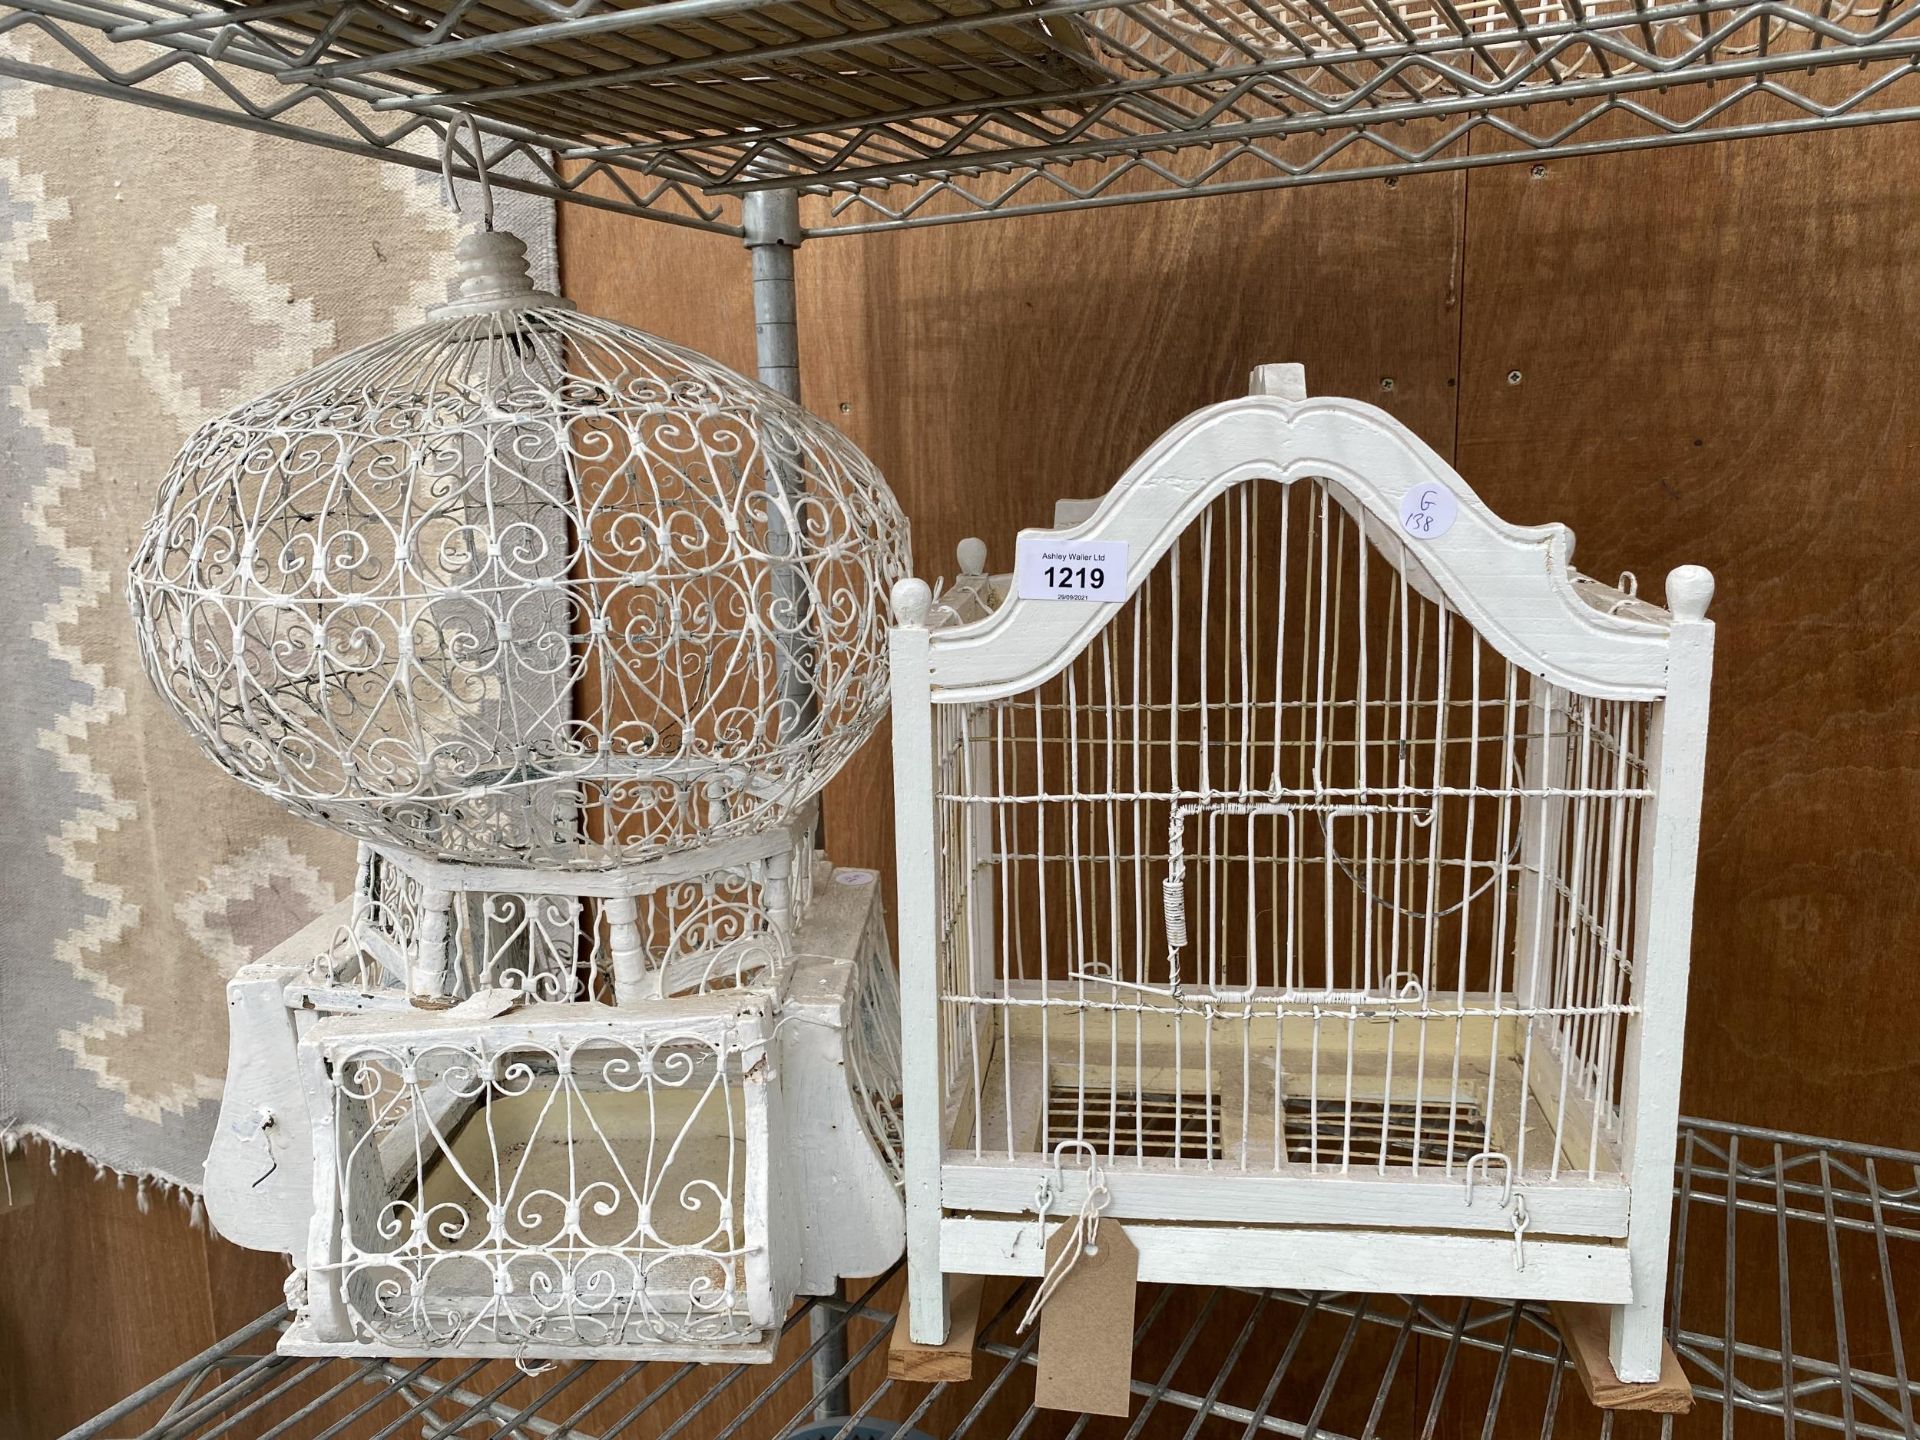 TWO DECORATIVE WOODEN AND METAL BIRD CAGES